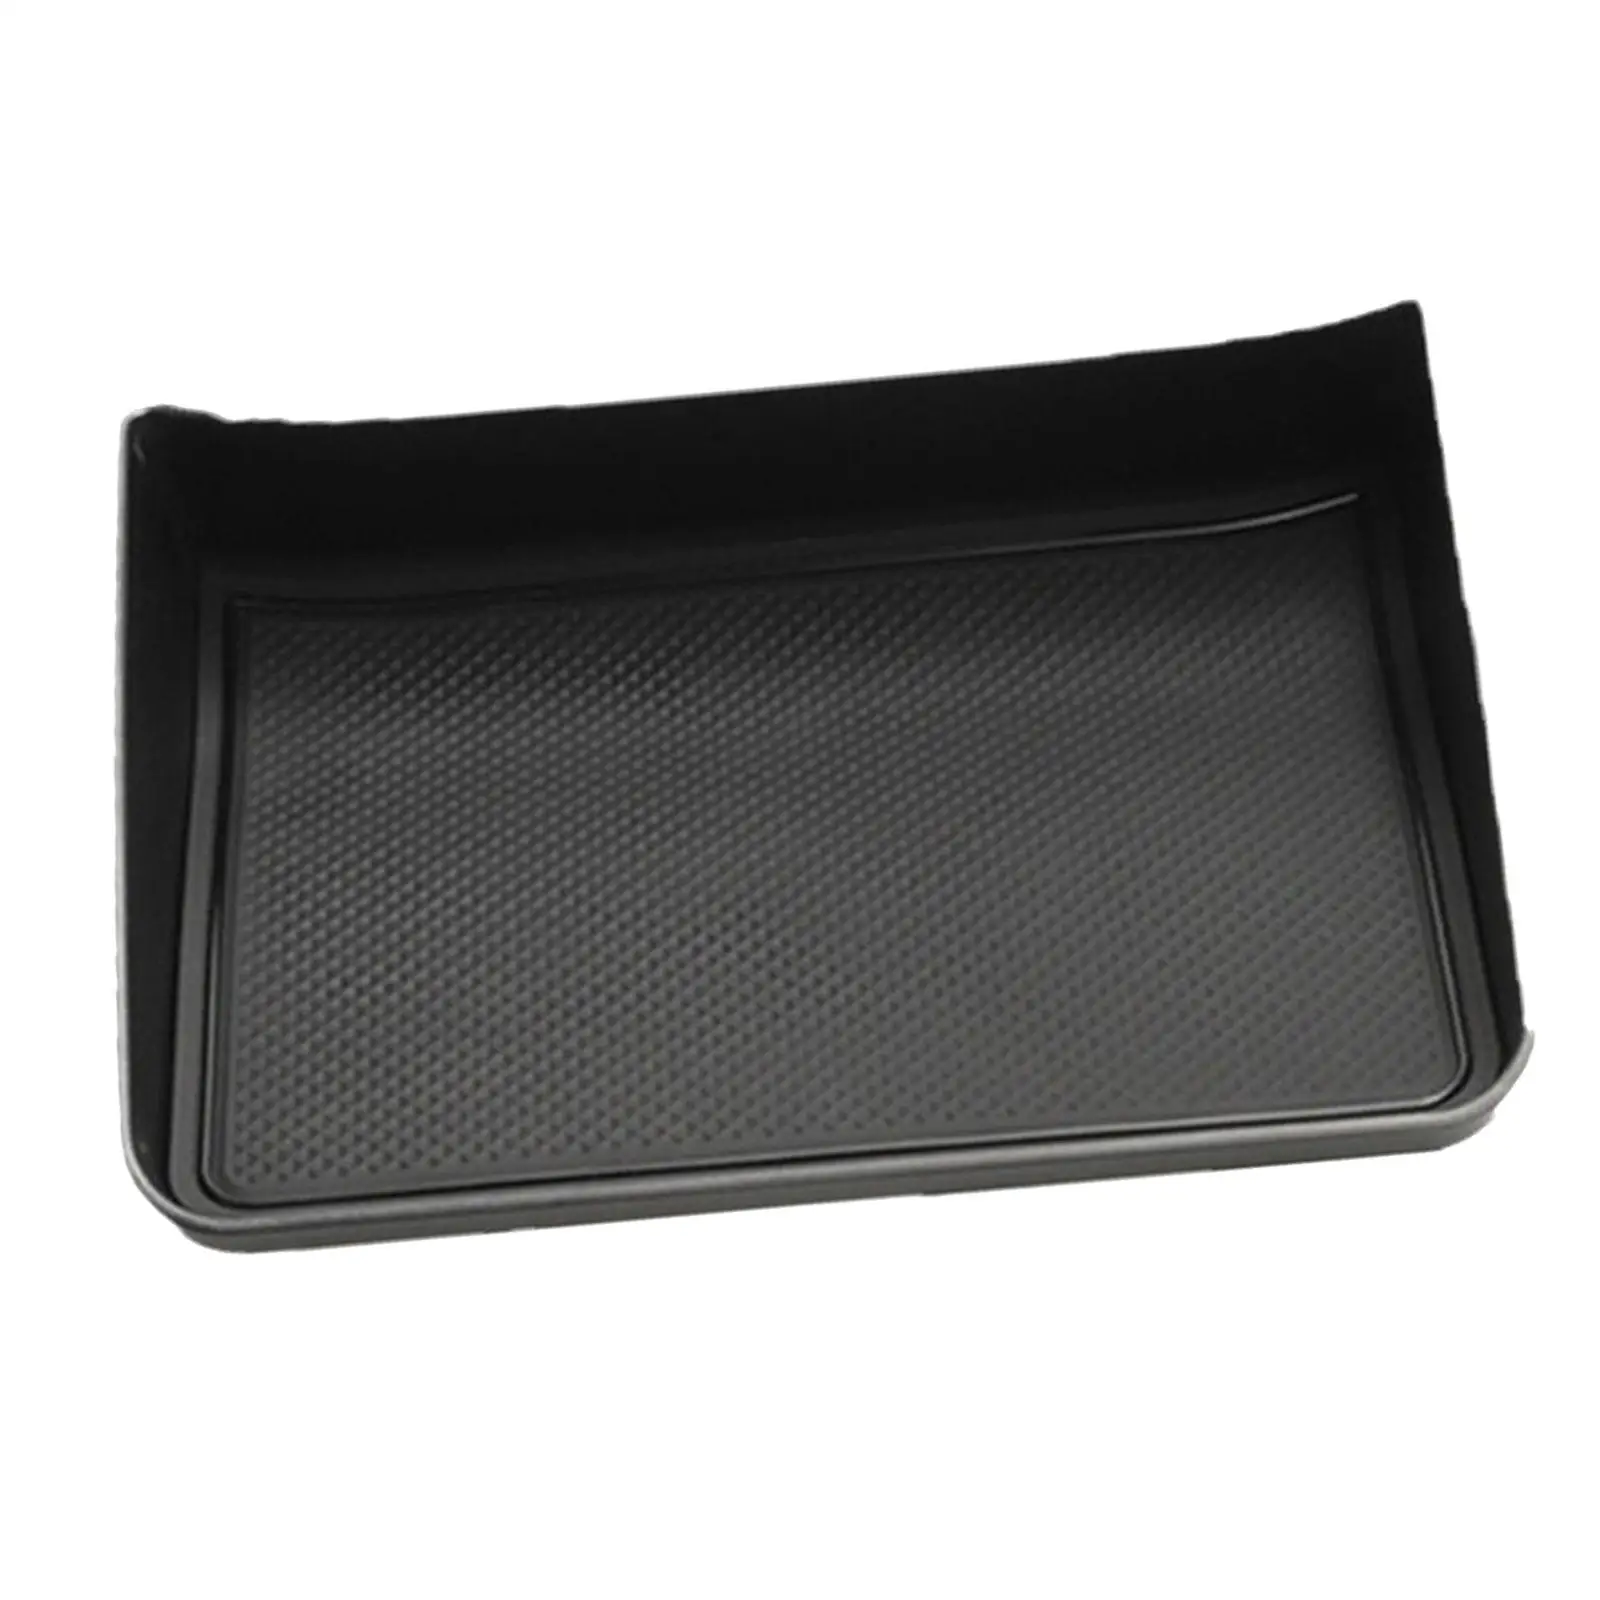 Dashboard Organizer Interior Accessories Professional Anti Slip Durable Replaces Assembly Car Tissue Holder for Toyota bz3